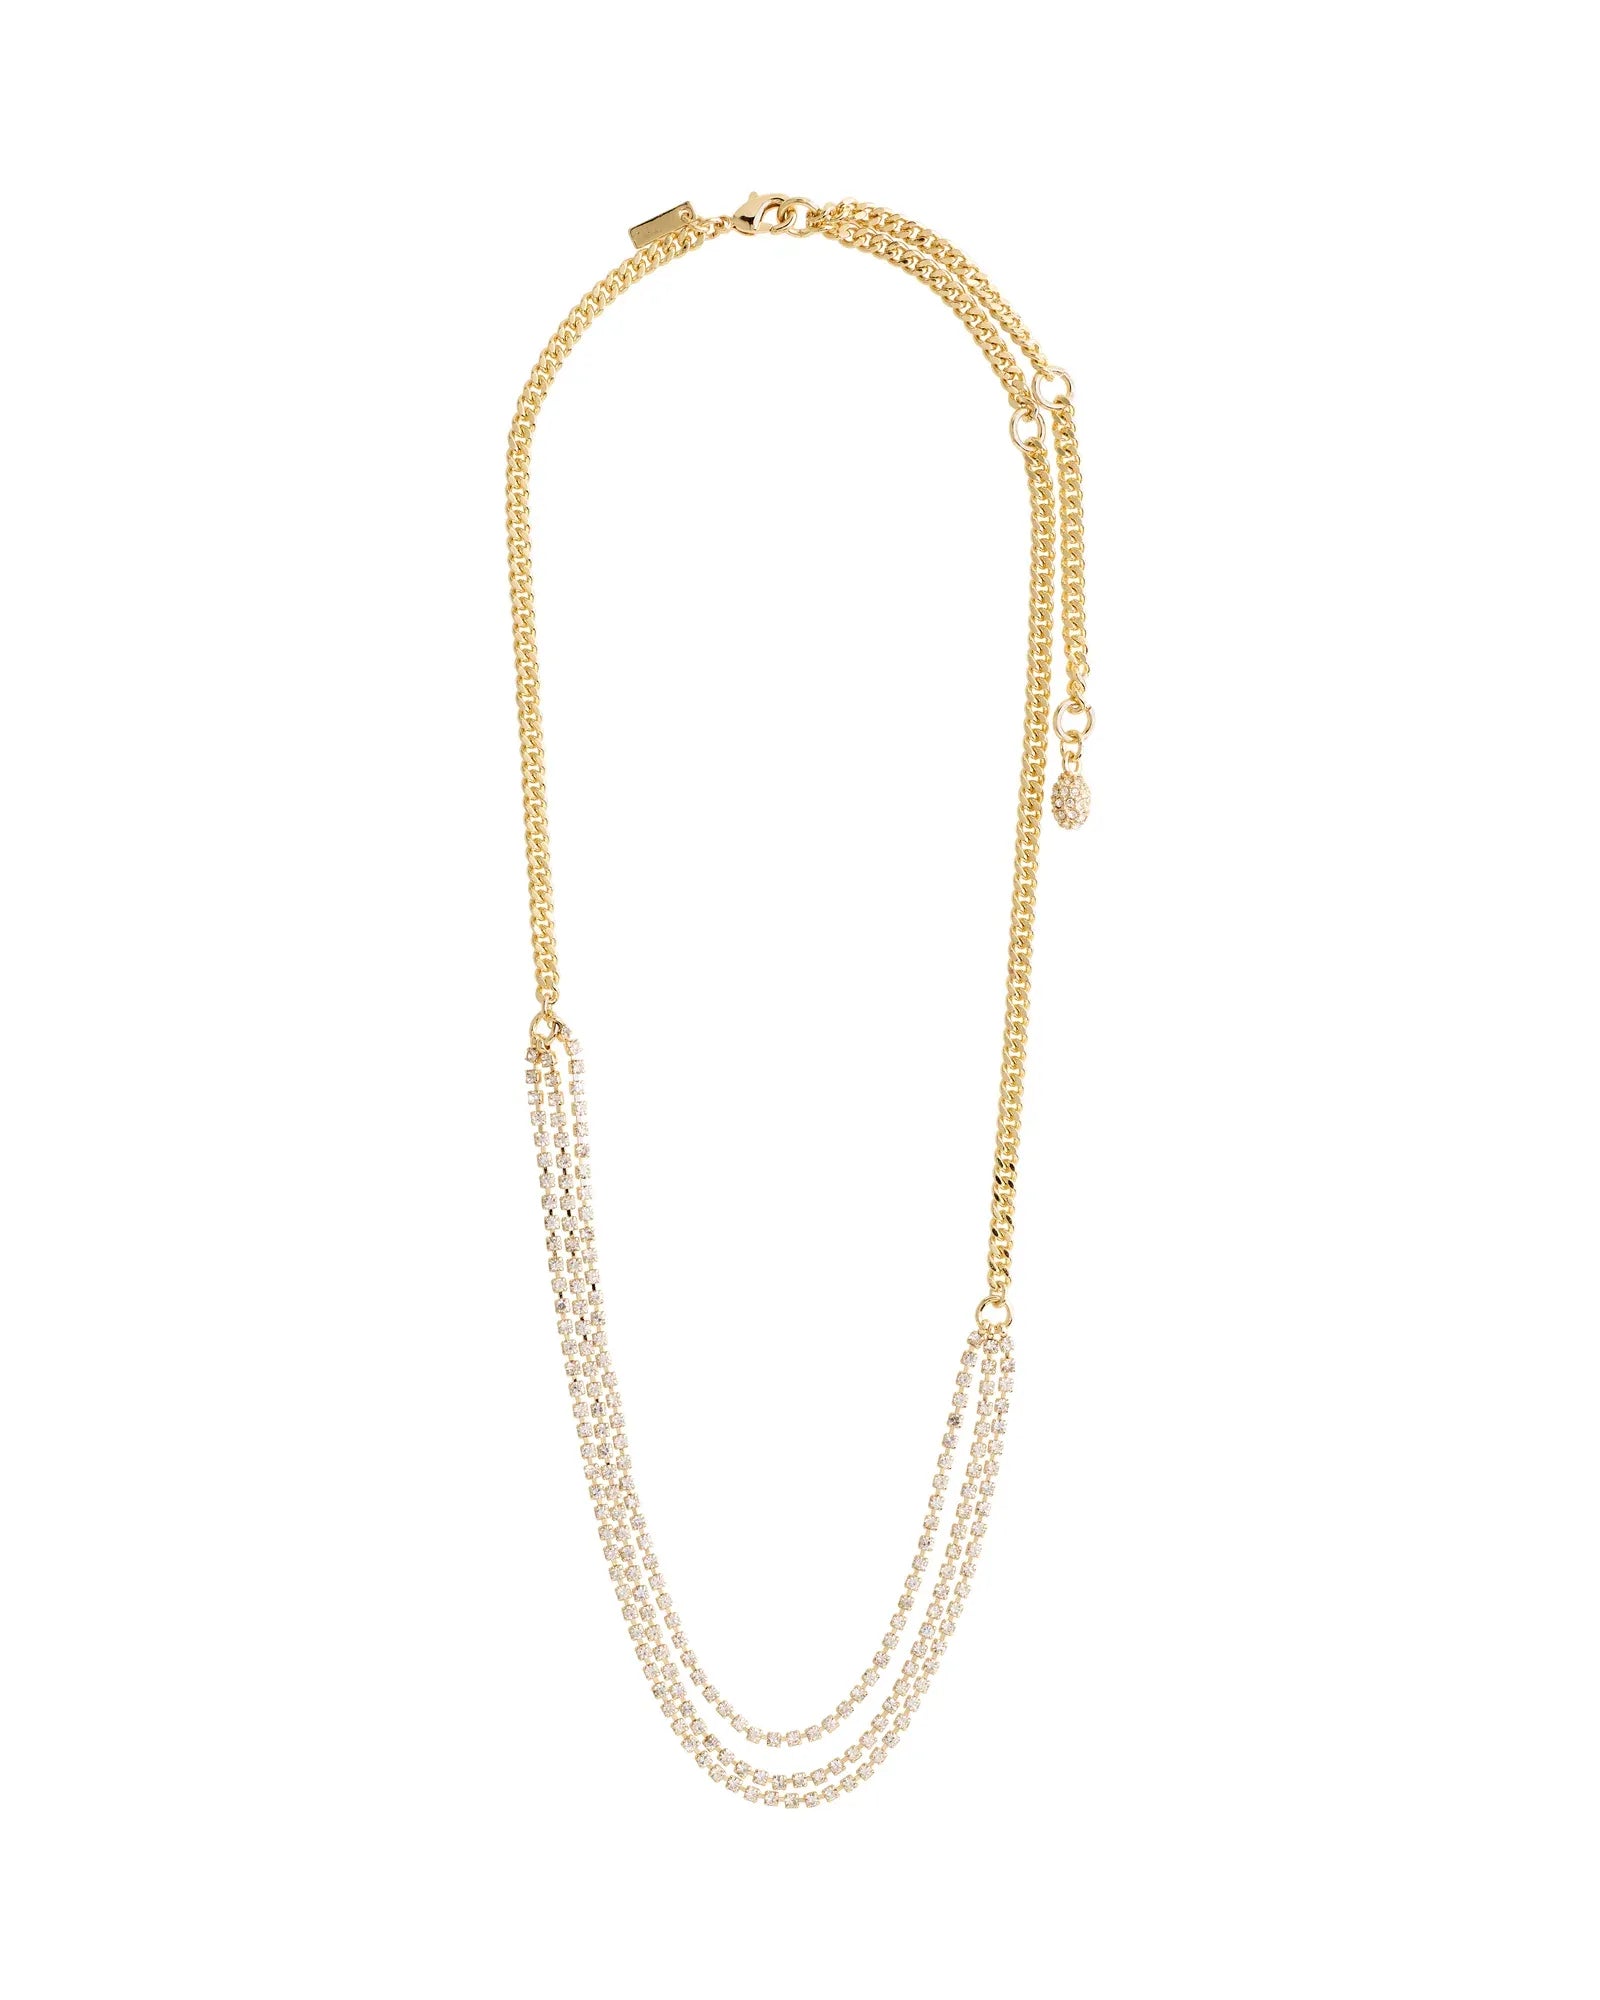 Blink Crystal Necklace - Gold Plated